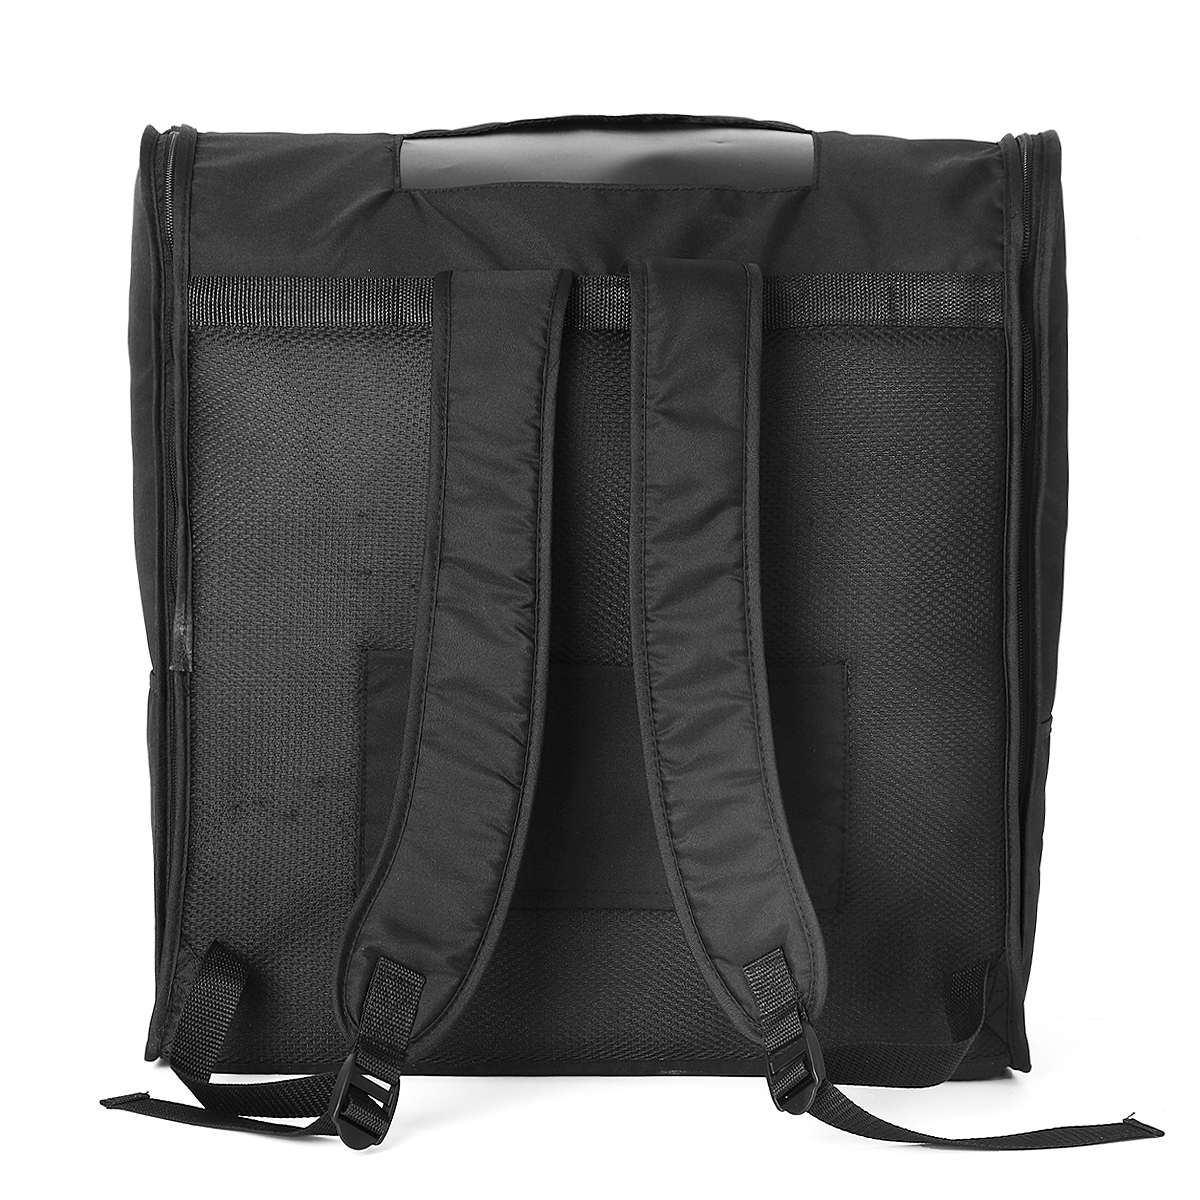 Uber Tubers Drawstring Backpack Sports Athletic Gym Cinch Sack String Storage Bags for Hiking Travel Beach